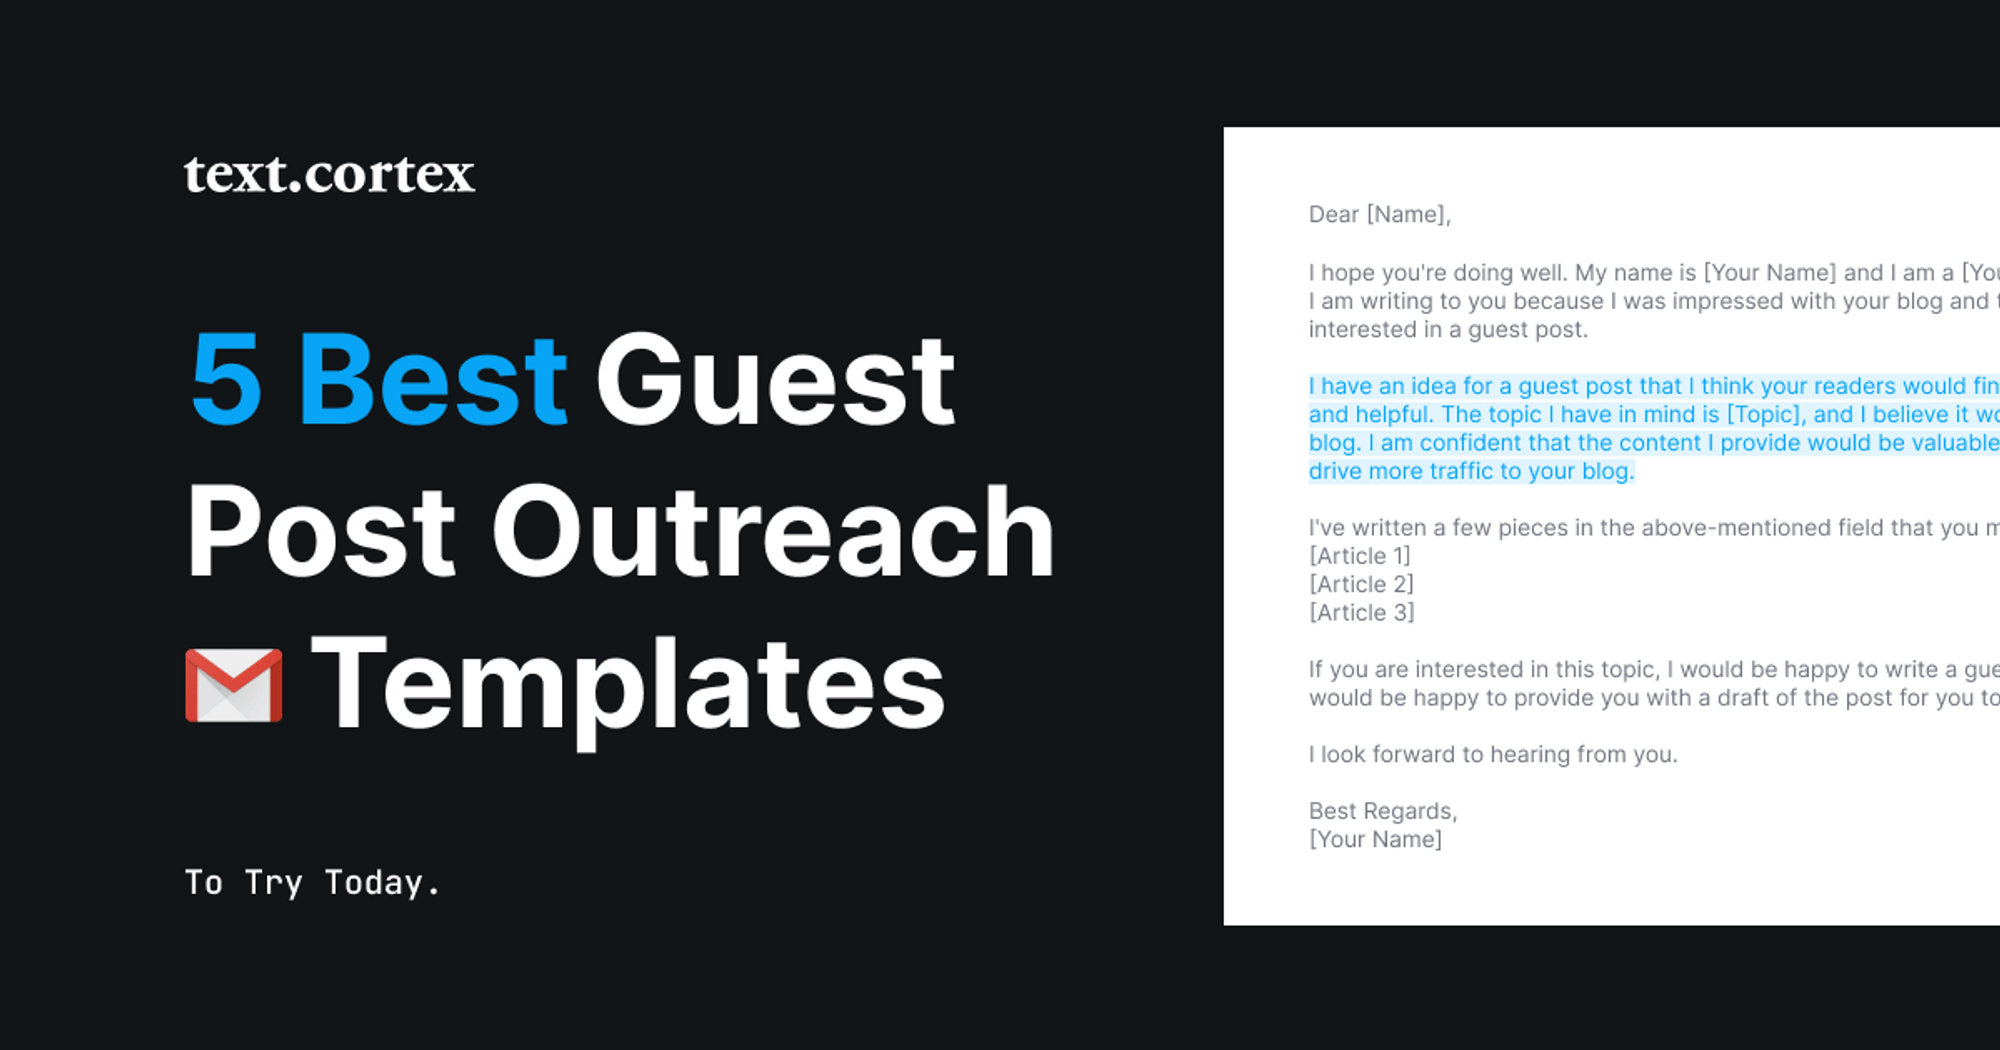 5 Best GuestPost Outreach EmailTemplates To Try Today